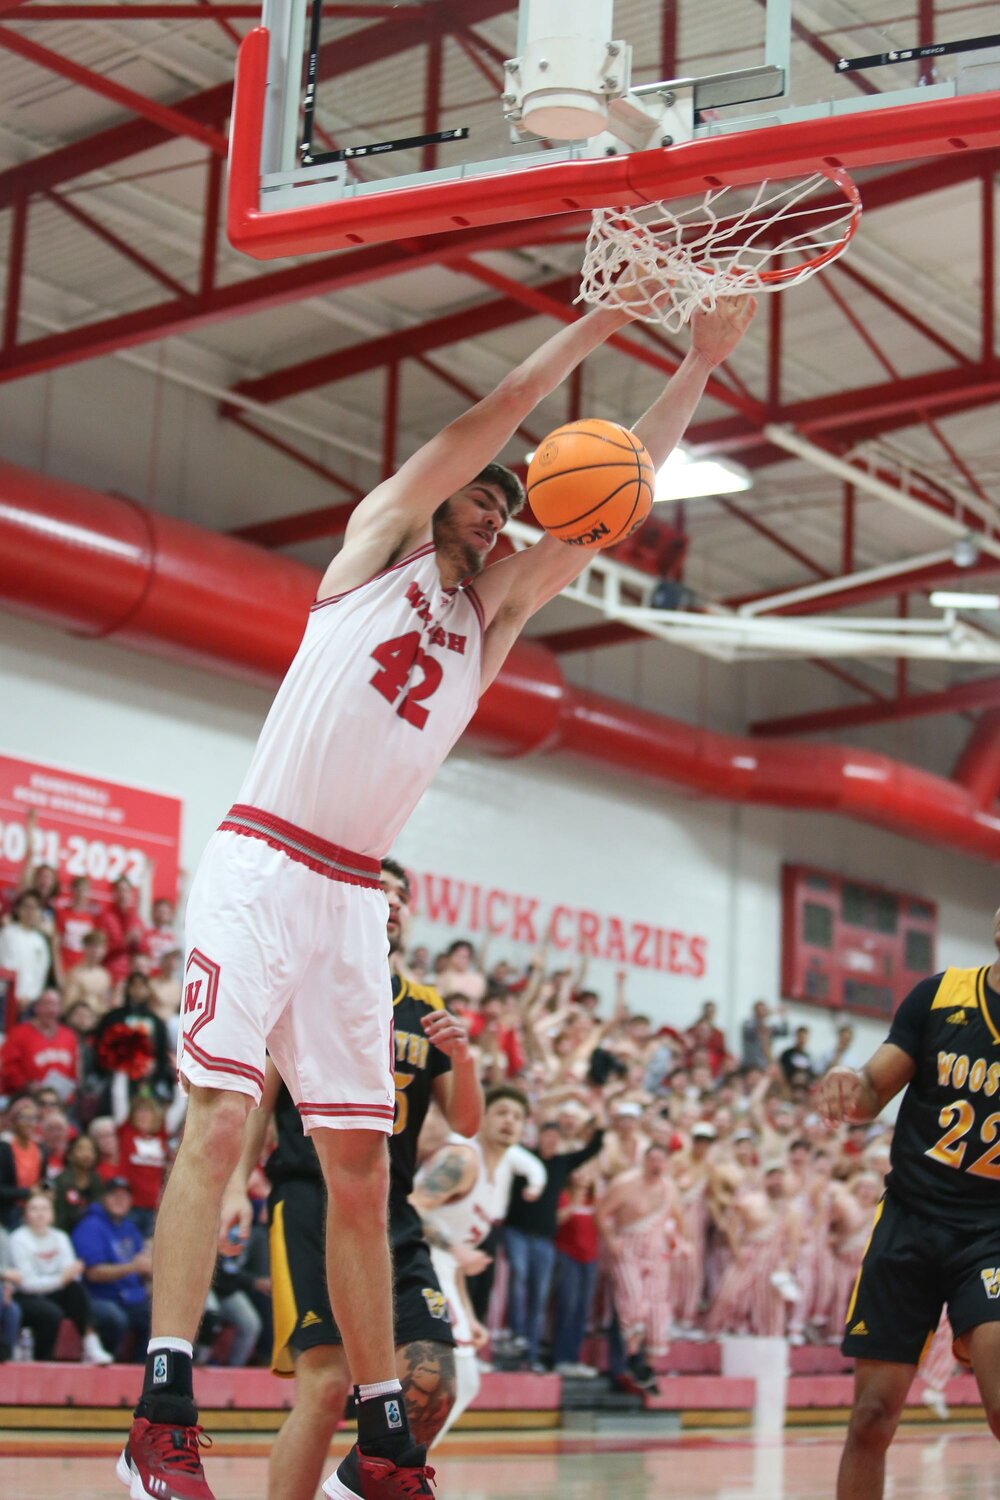 7’2 junior Noah Hupmann provided the Little Giants with the ultimate paint protector this season. Hupmann’s 74 blocks and 2.7 blocks per game are both Wabash single-season records.